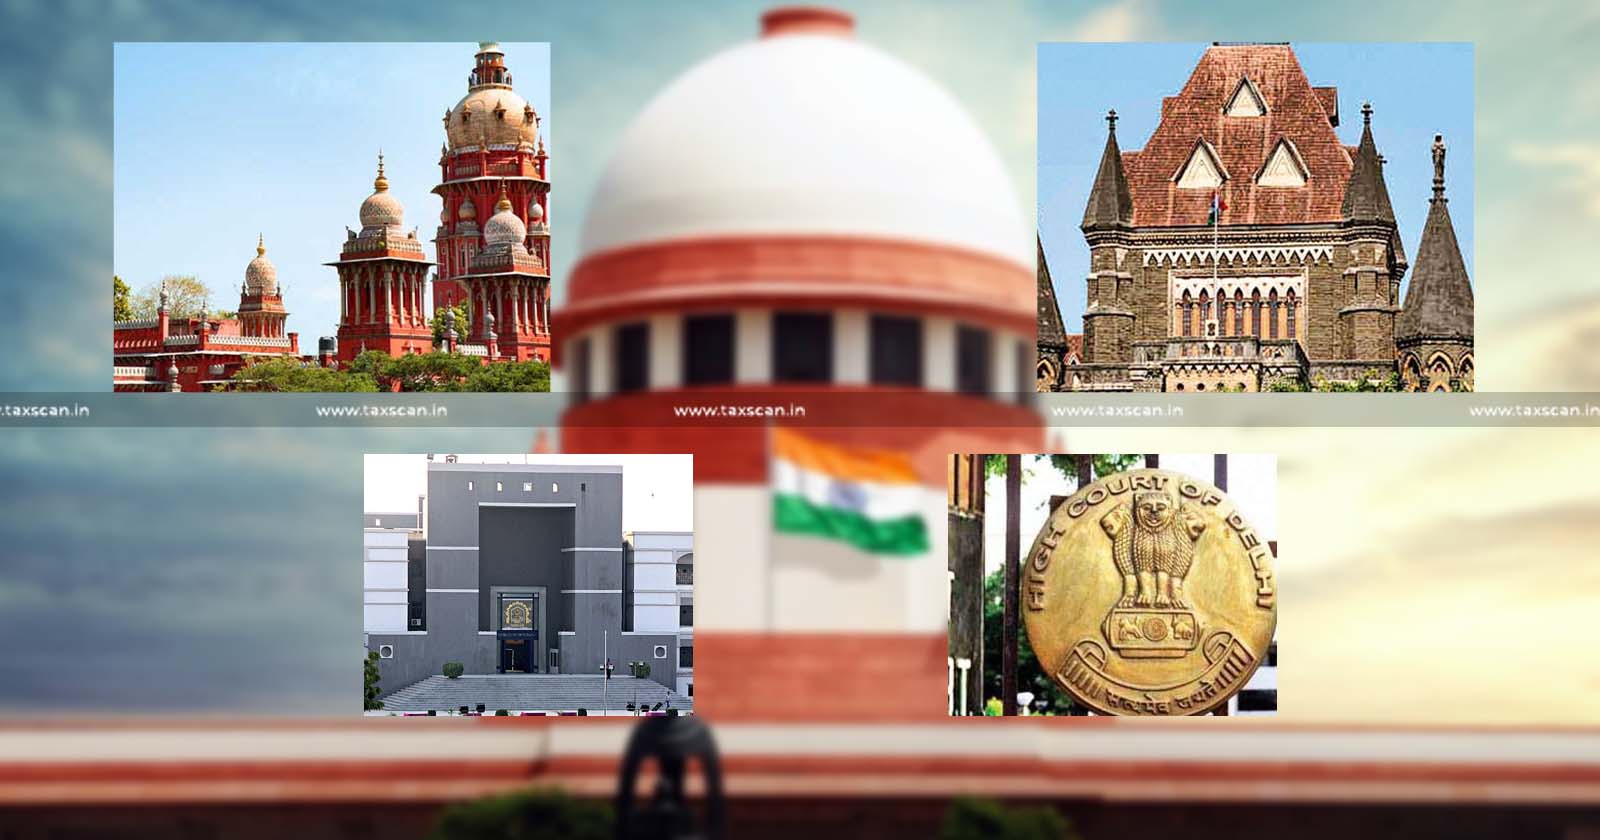 Important Income Tax High Court Judgements - Income Tax High Court Judgements - Income Tax Judgements - High Court Judgements - Income Tax - High Court - Taxscan